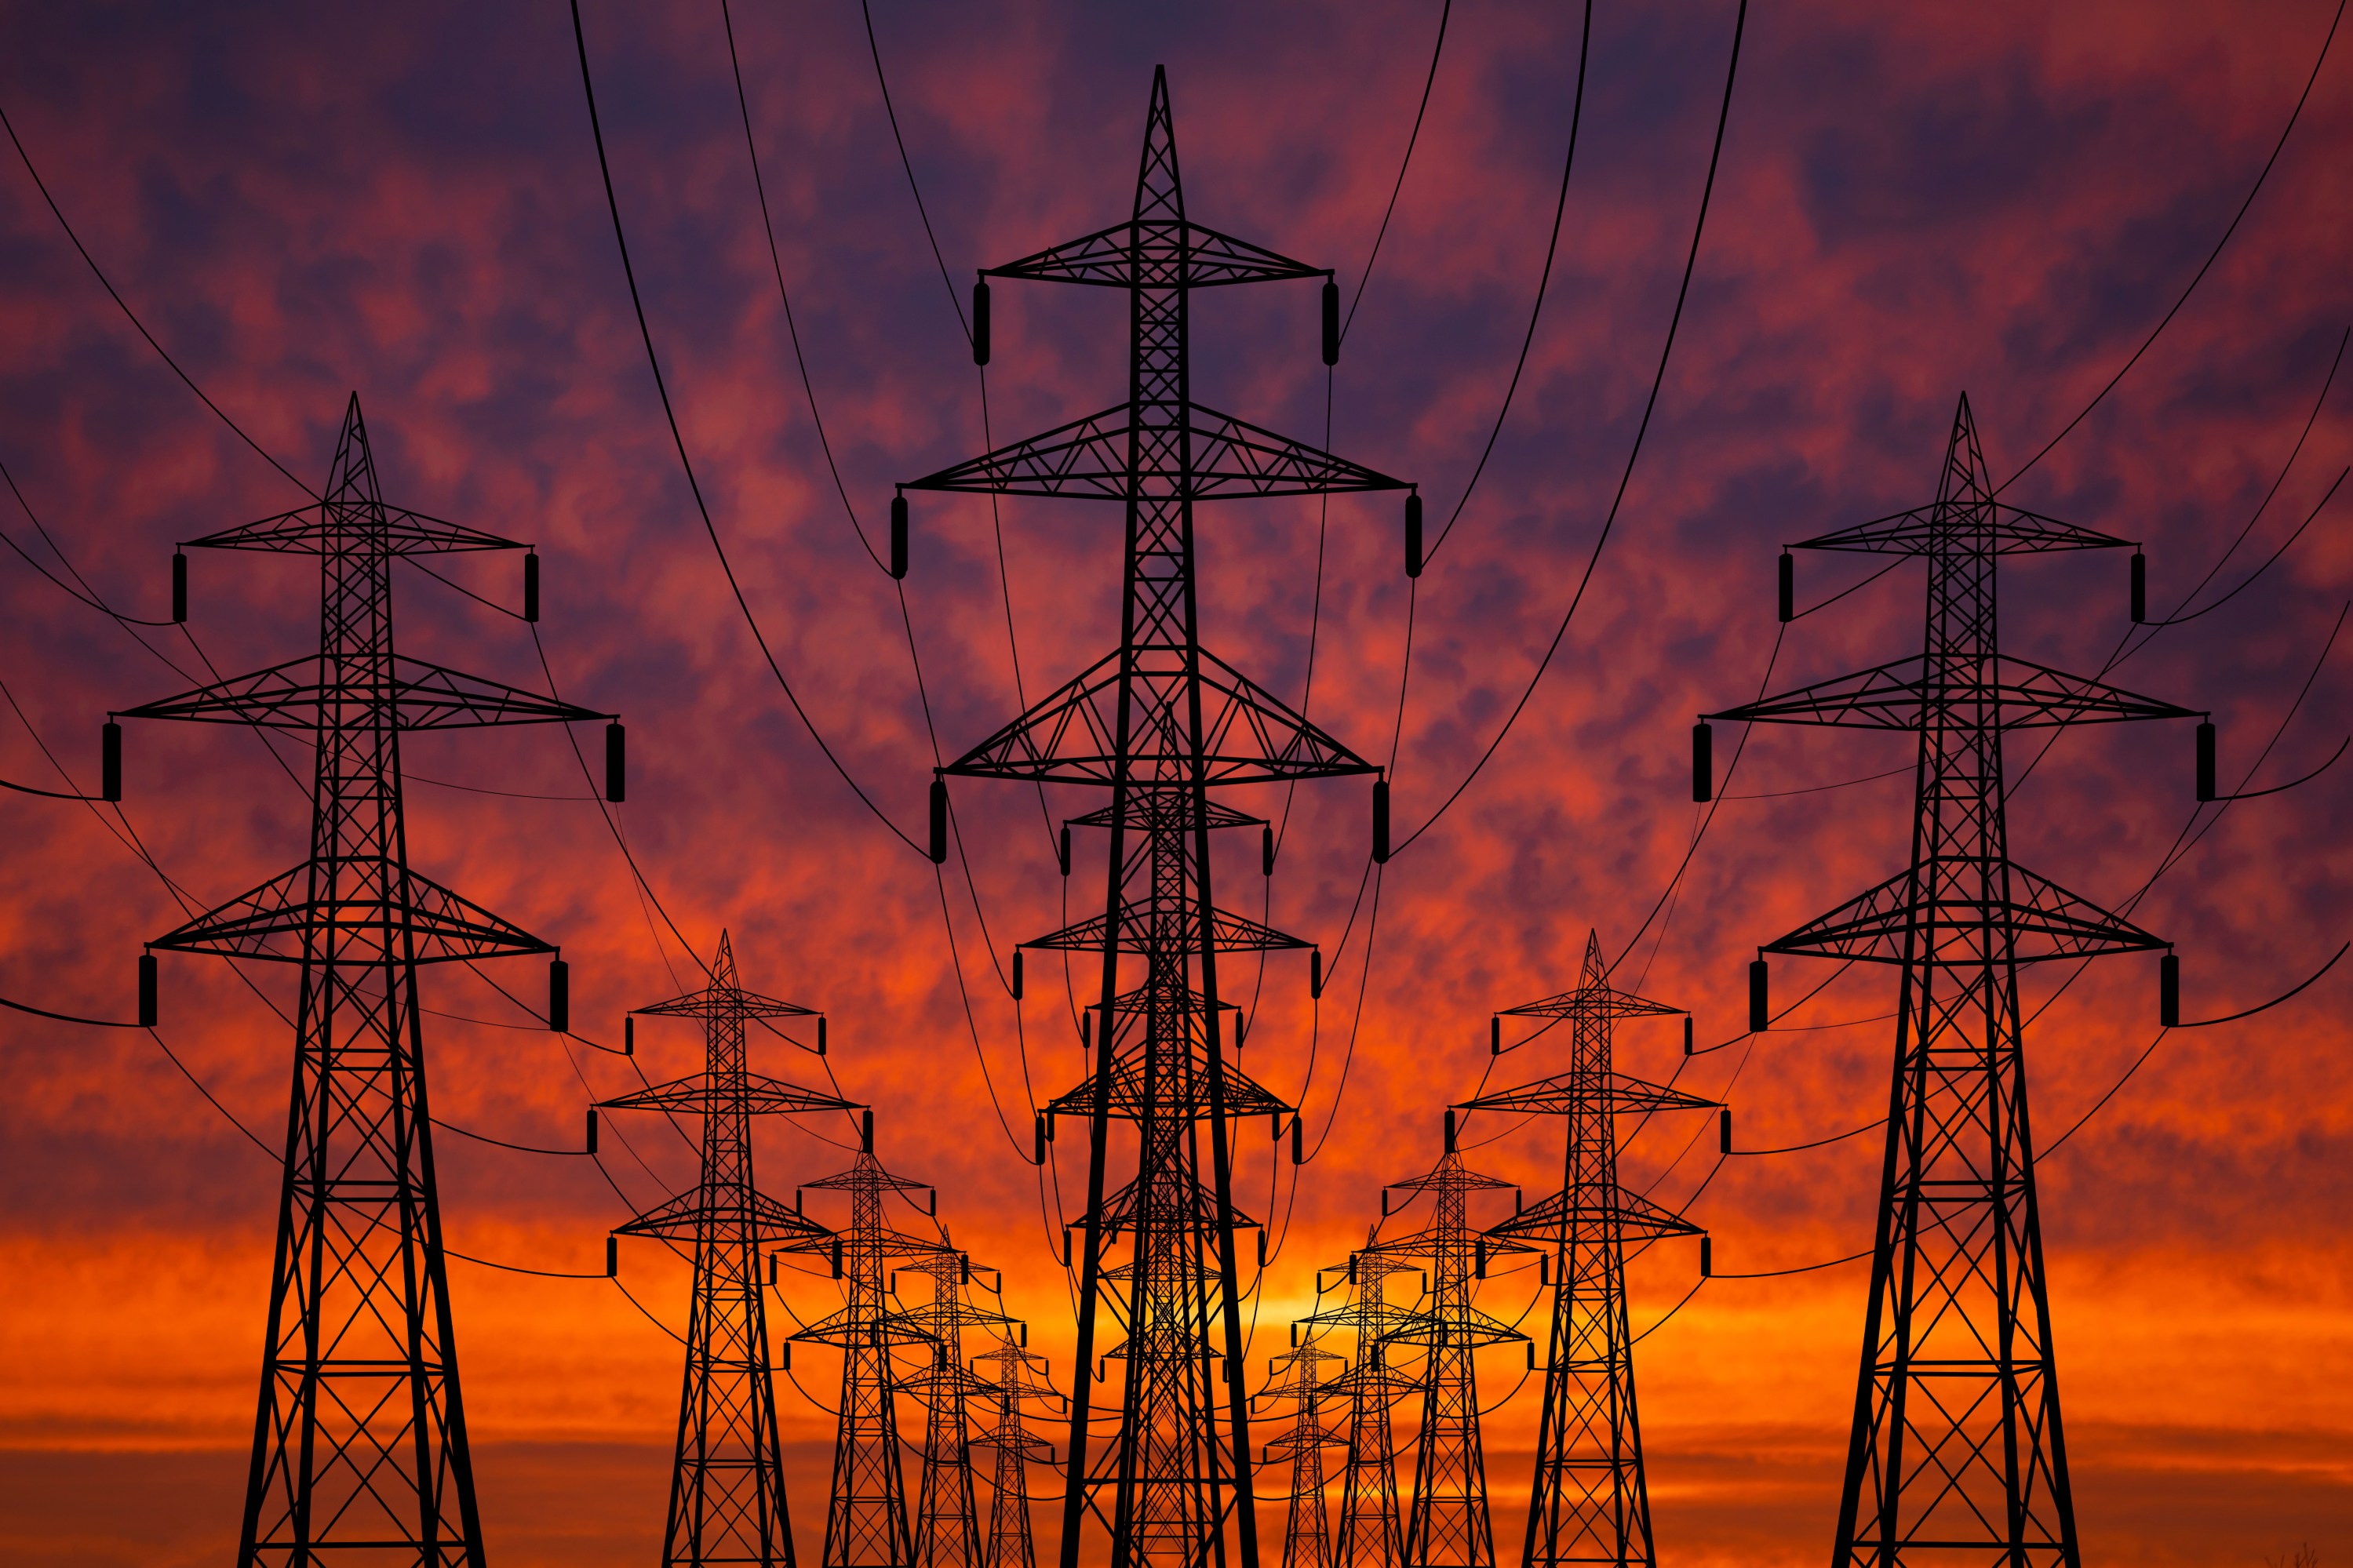 Photograph of High voltage towers at sunset. Power lines against the sky